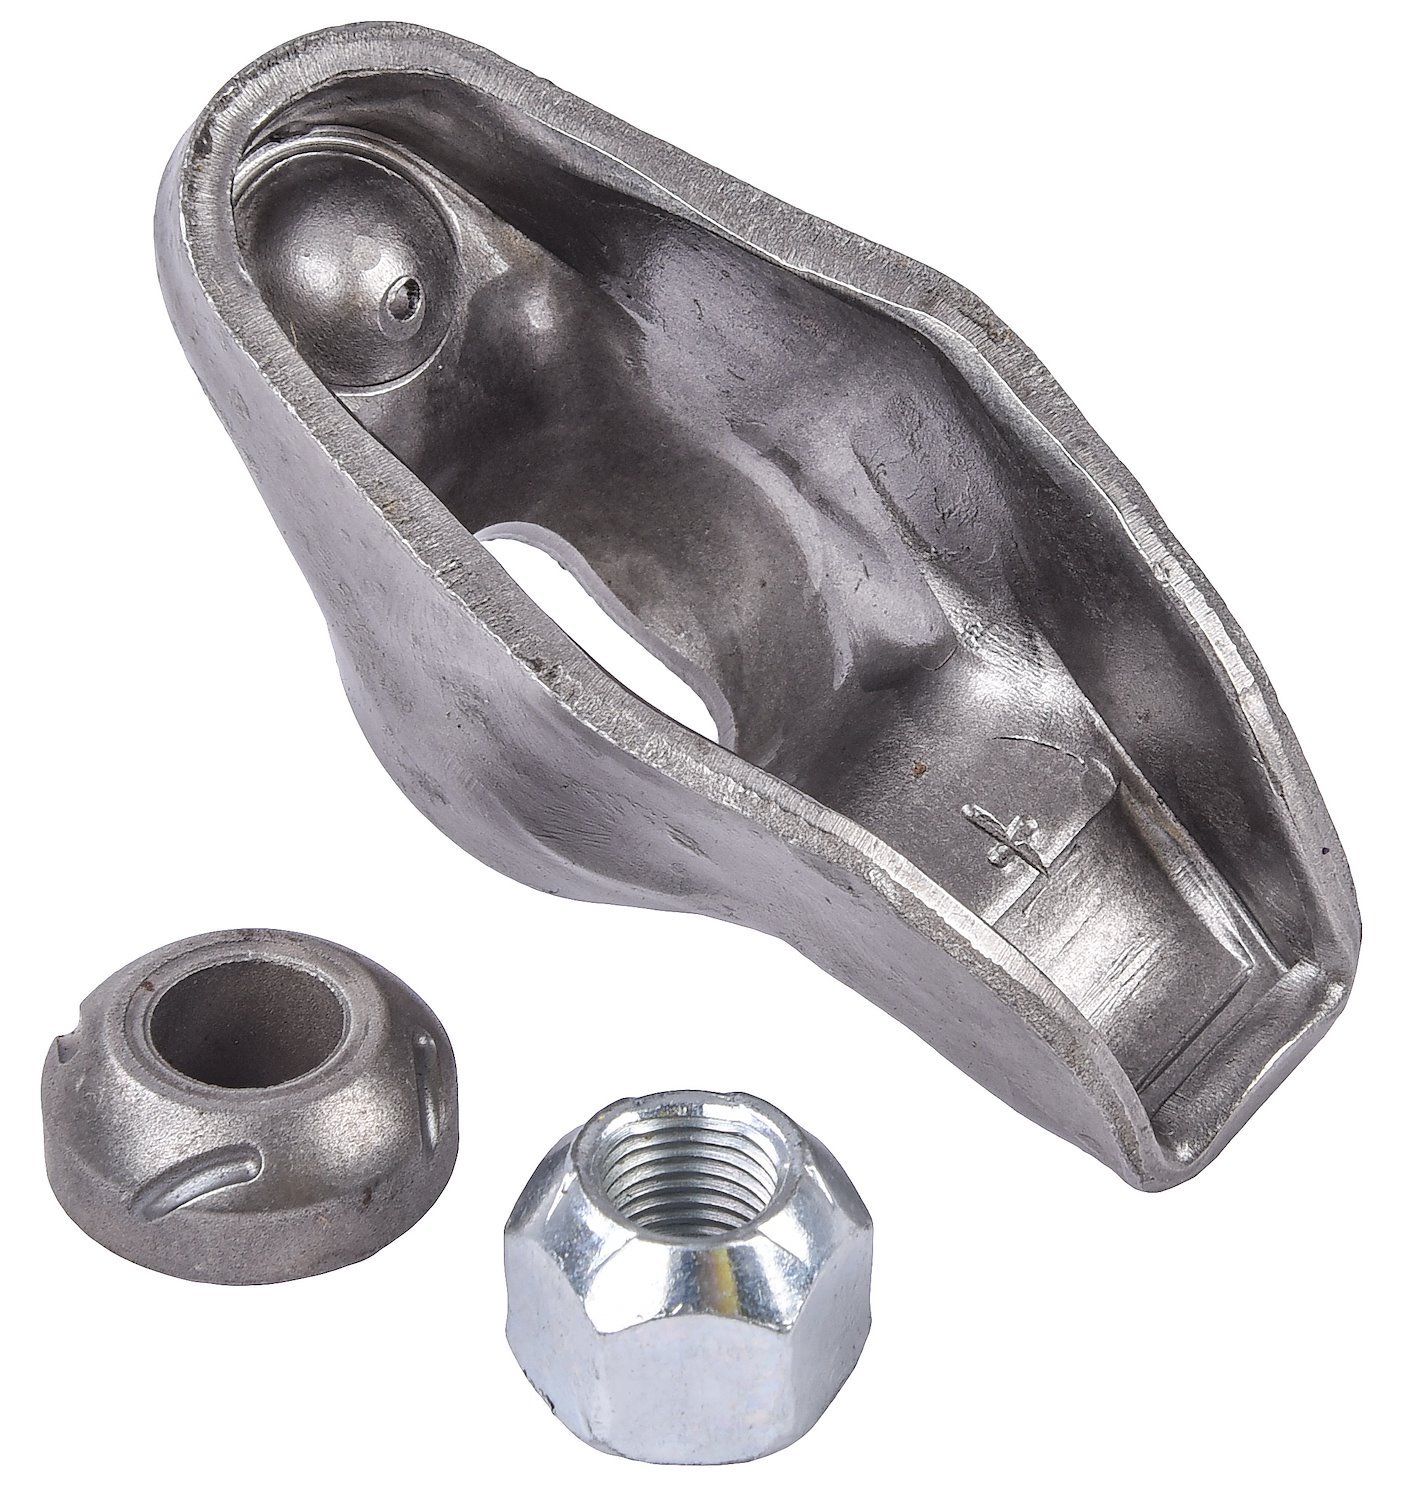 Stamped Steel Rocker Arm for 1955-1986 Small Block Chevy [Sold Individually]